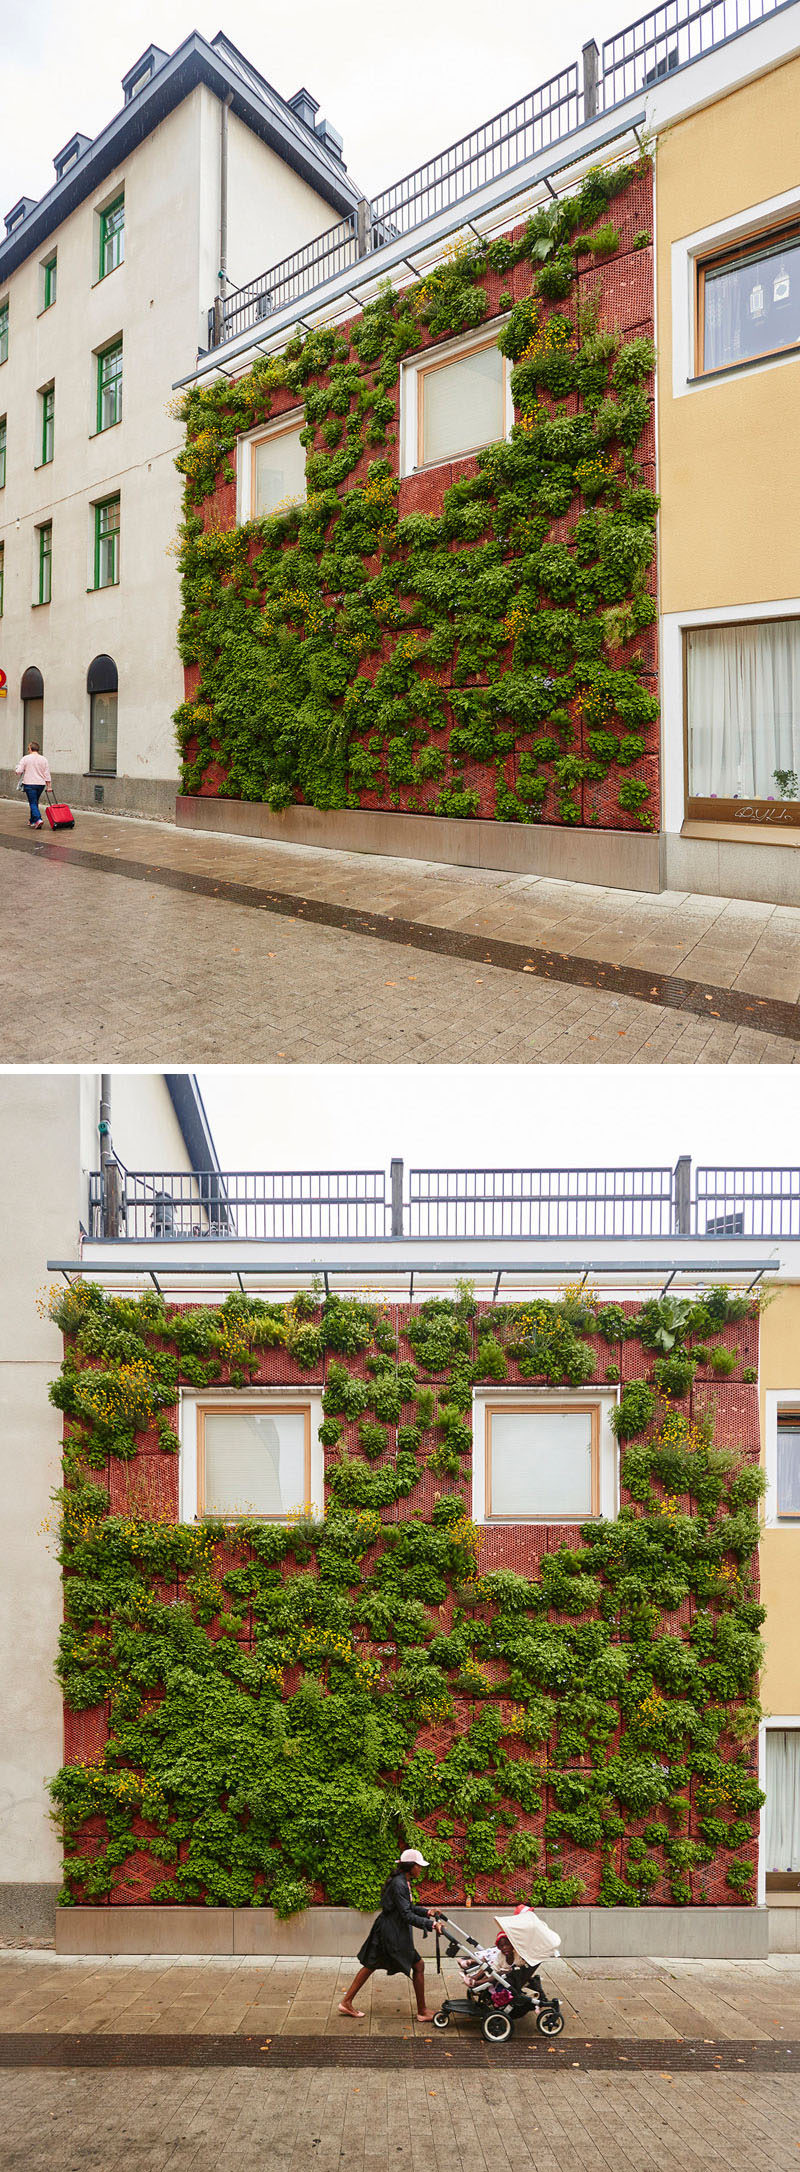 Butong, a Swedish company that creates cast concrete panels, have installed a green wall on a small building in Uppsala. #GreenWall #VerticalGarden #BuildingFacade